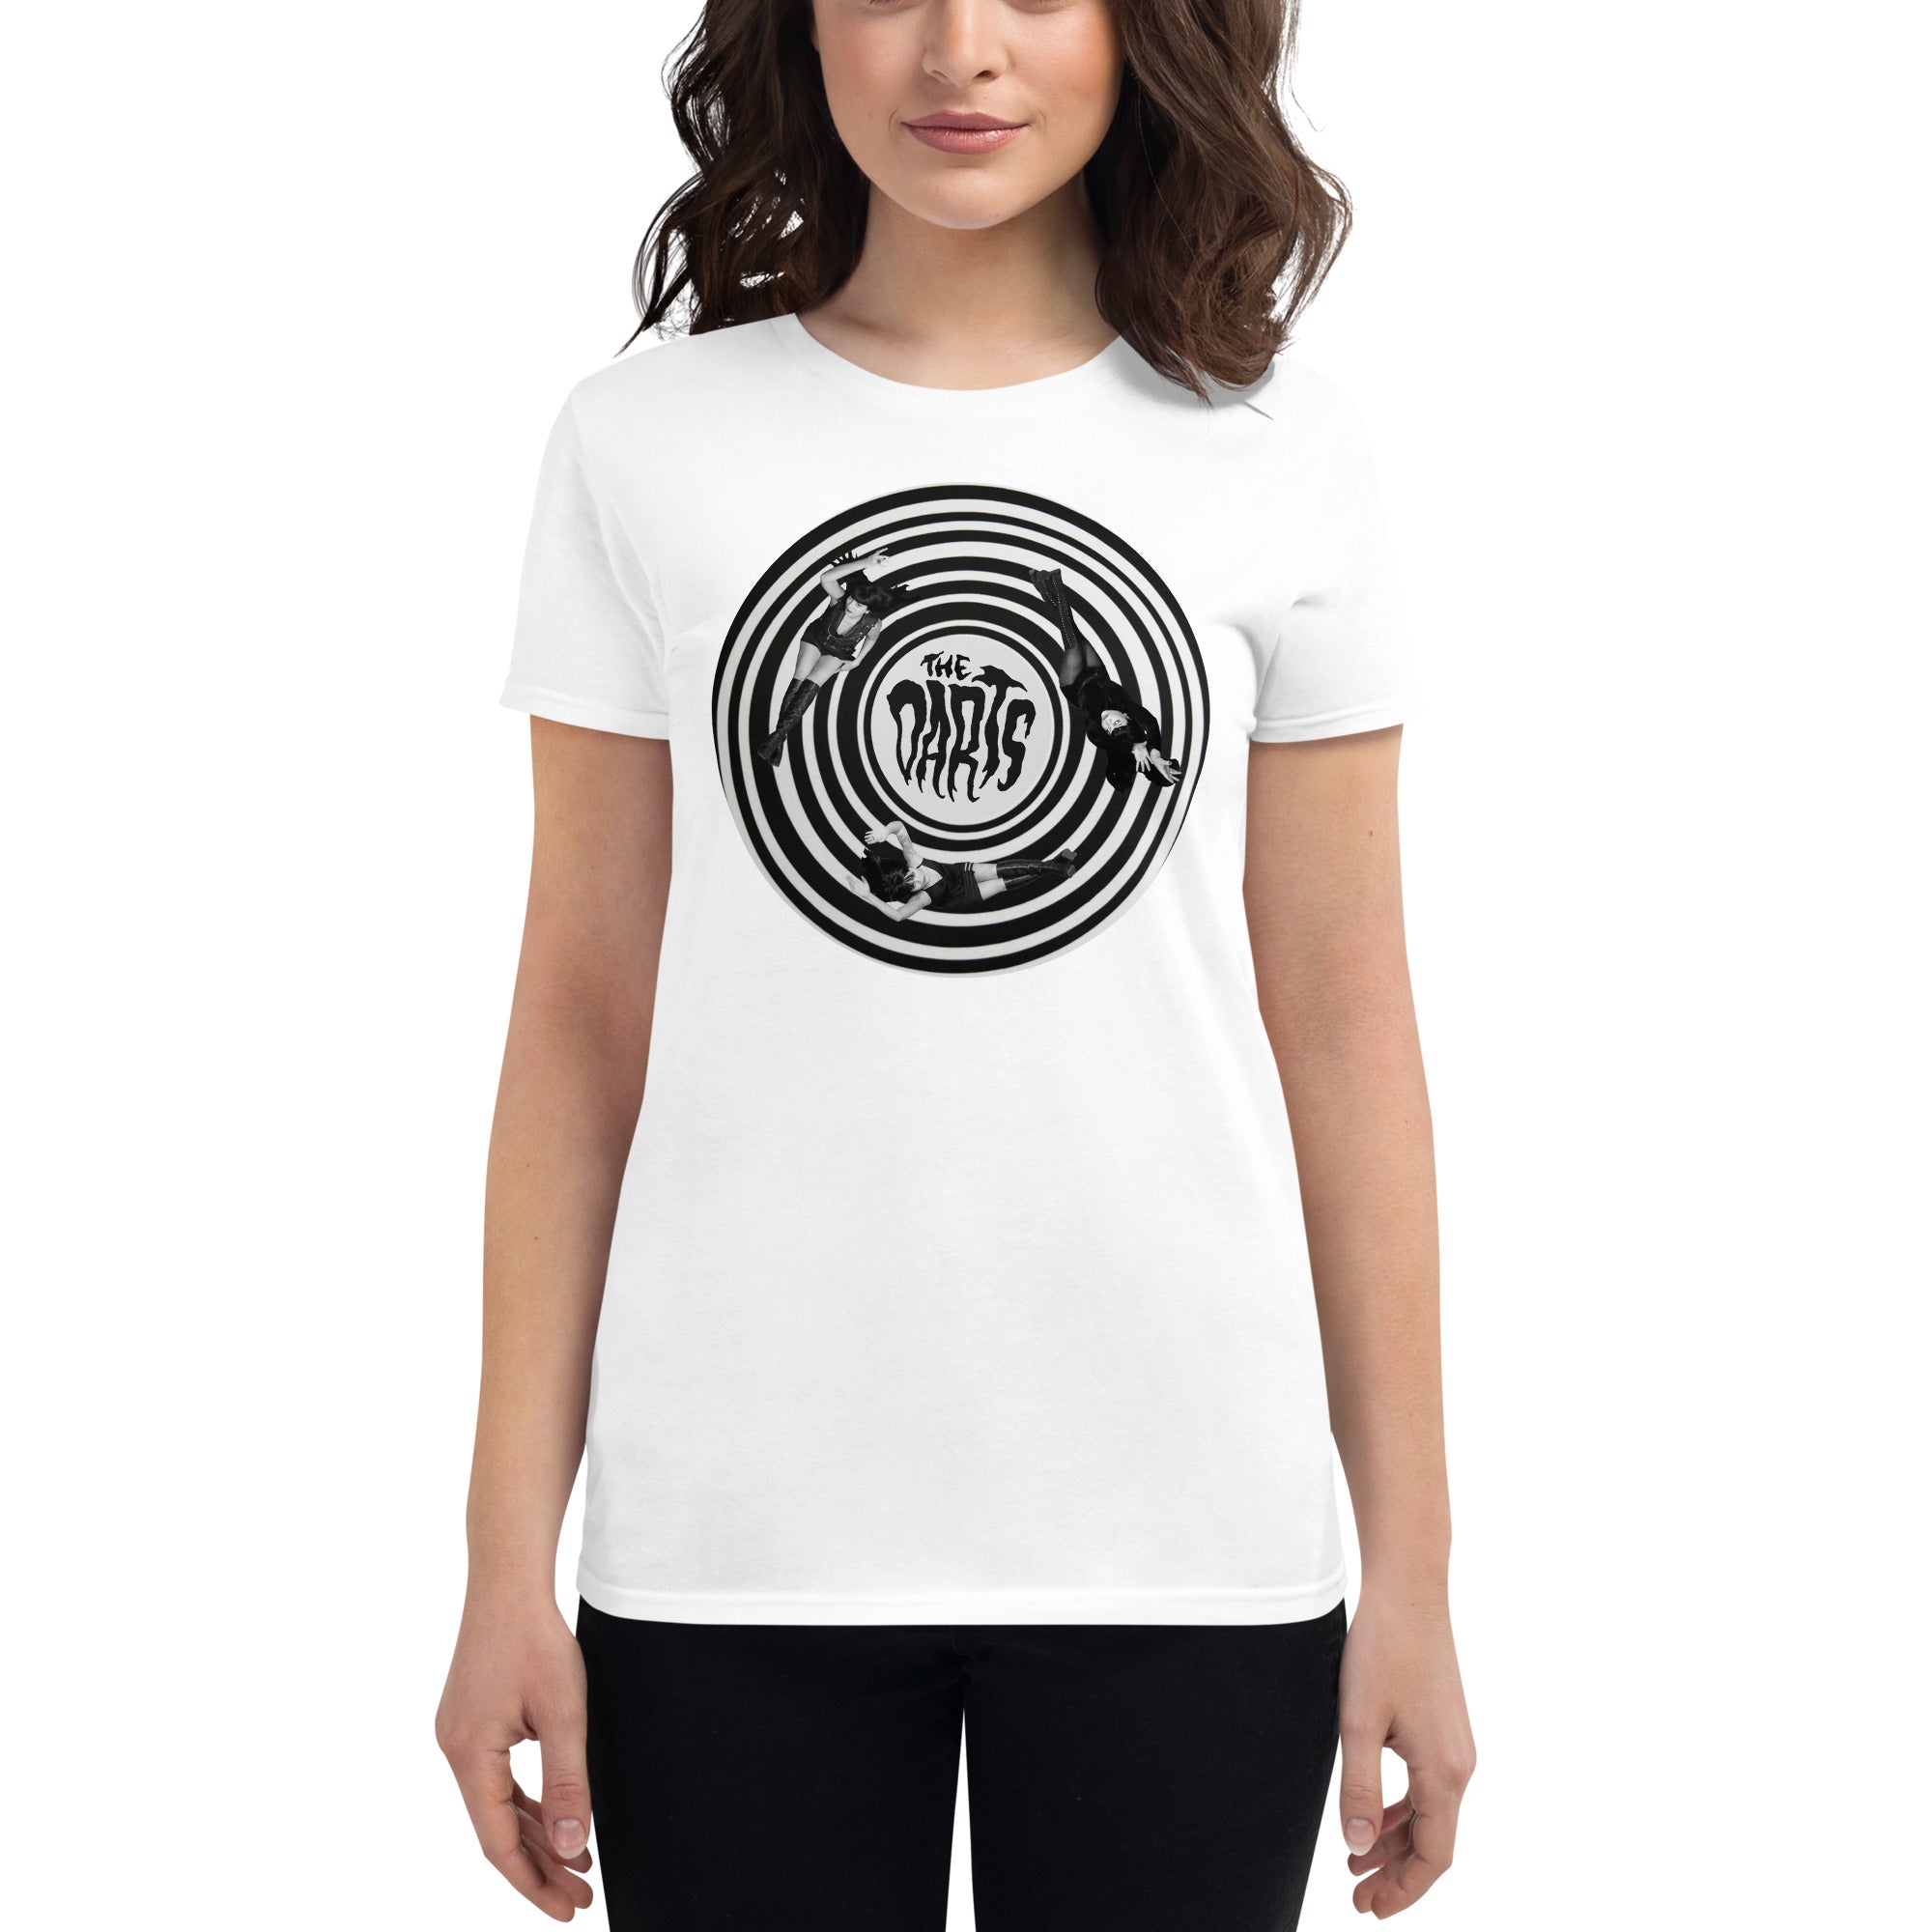 THE DARTS "Spiral" Fitted White T-Shirt